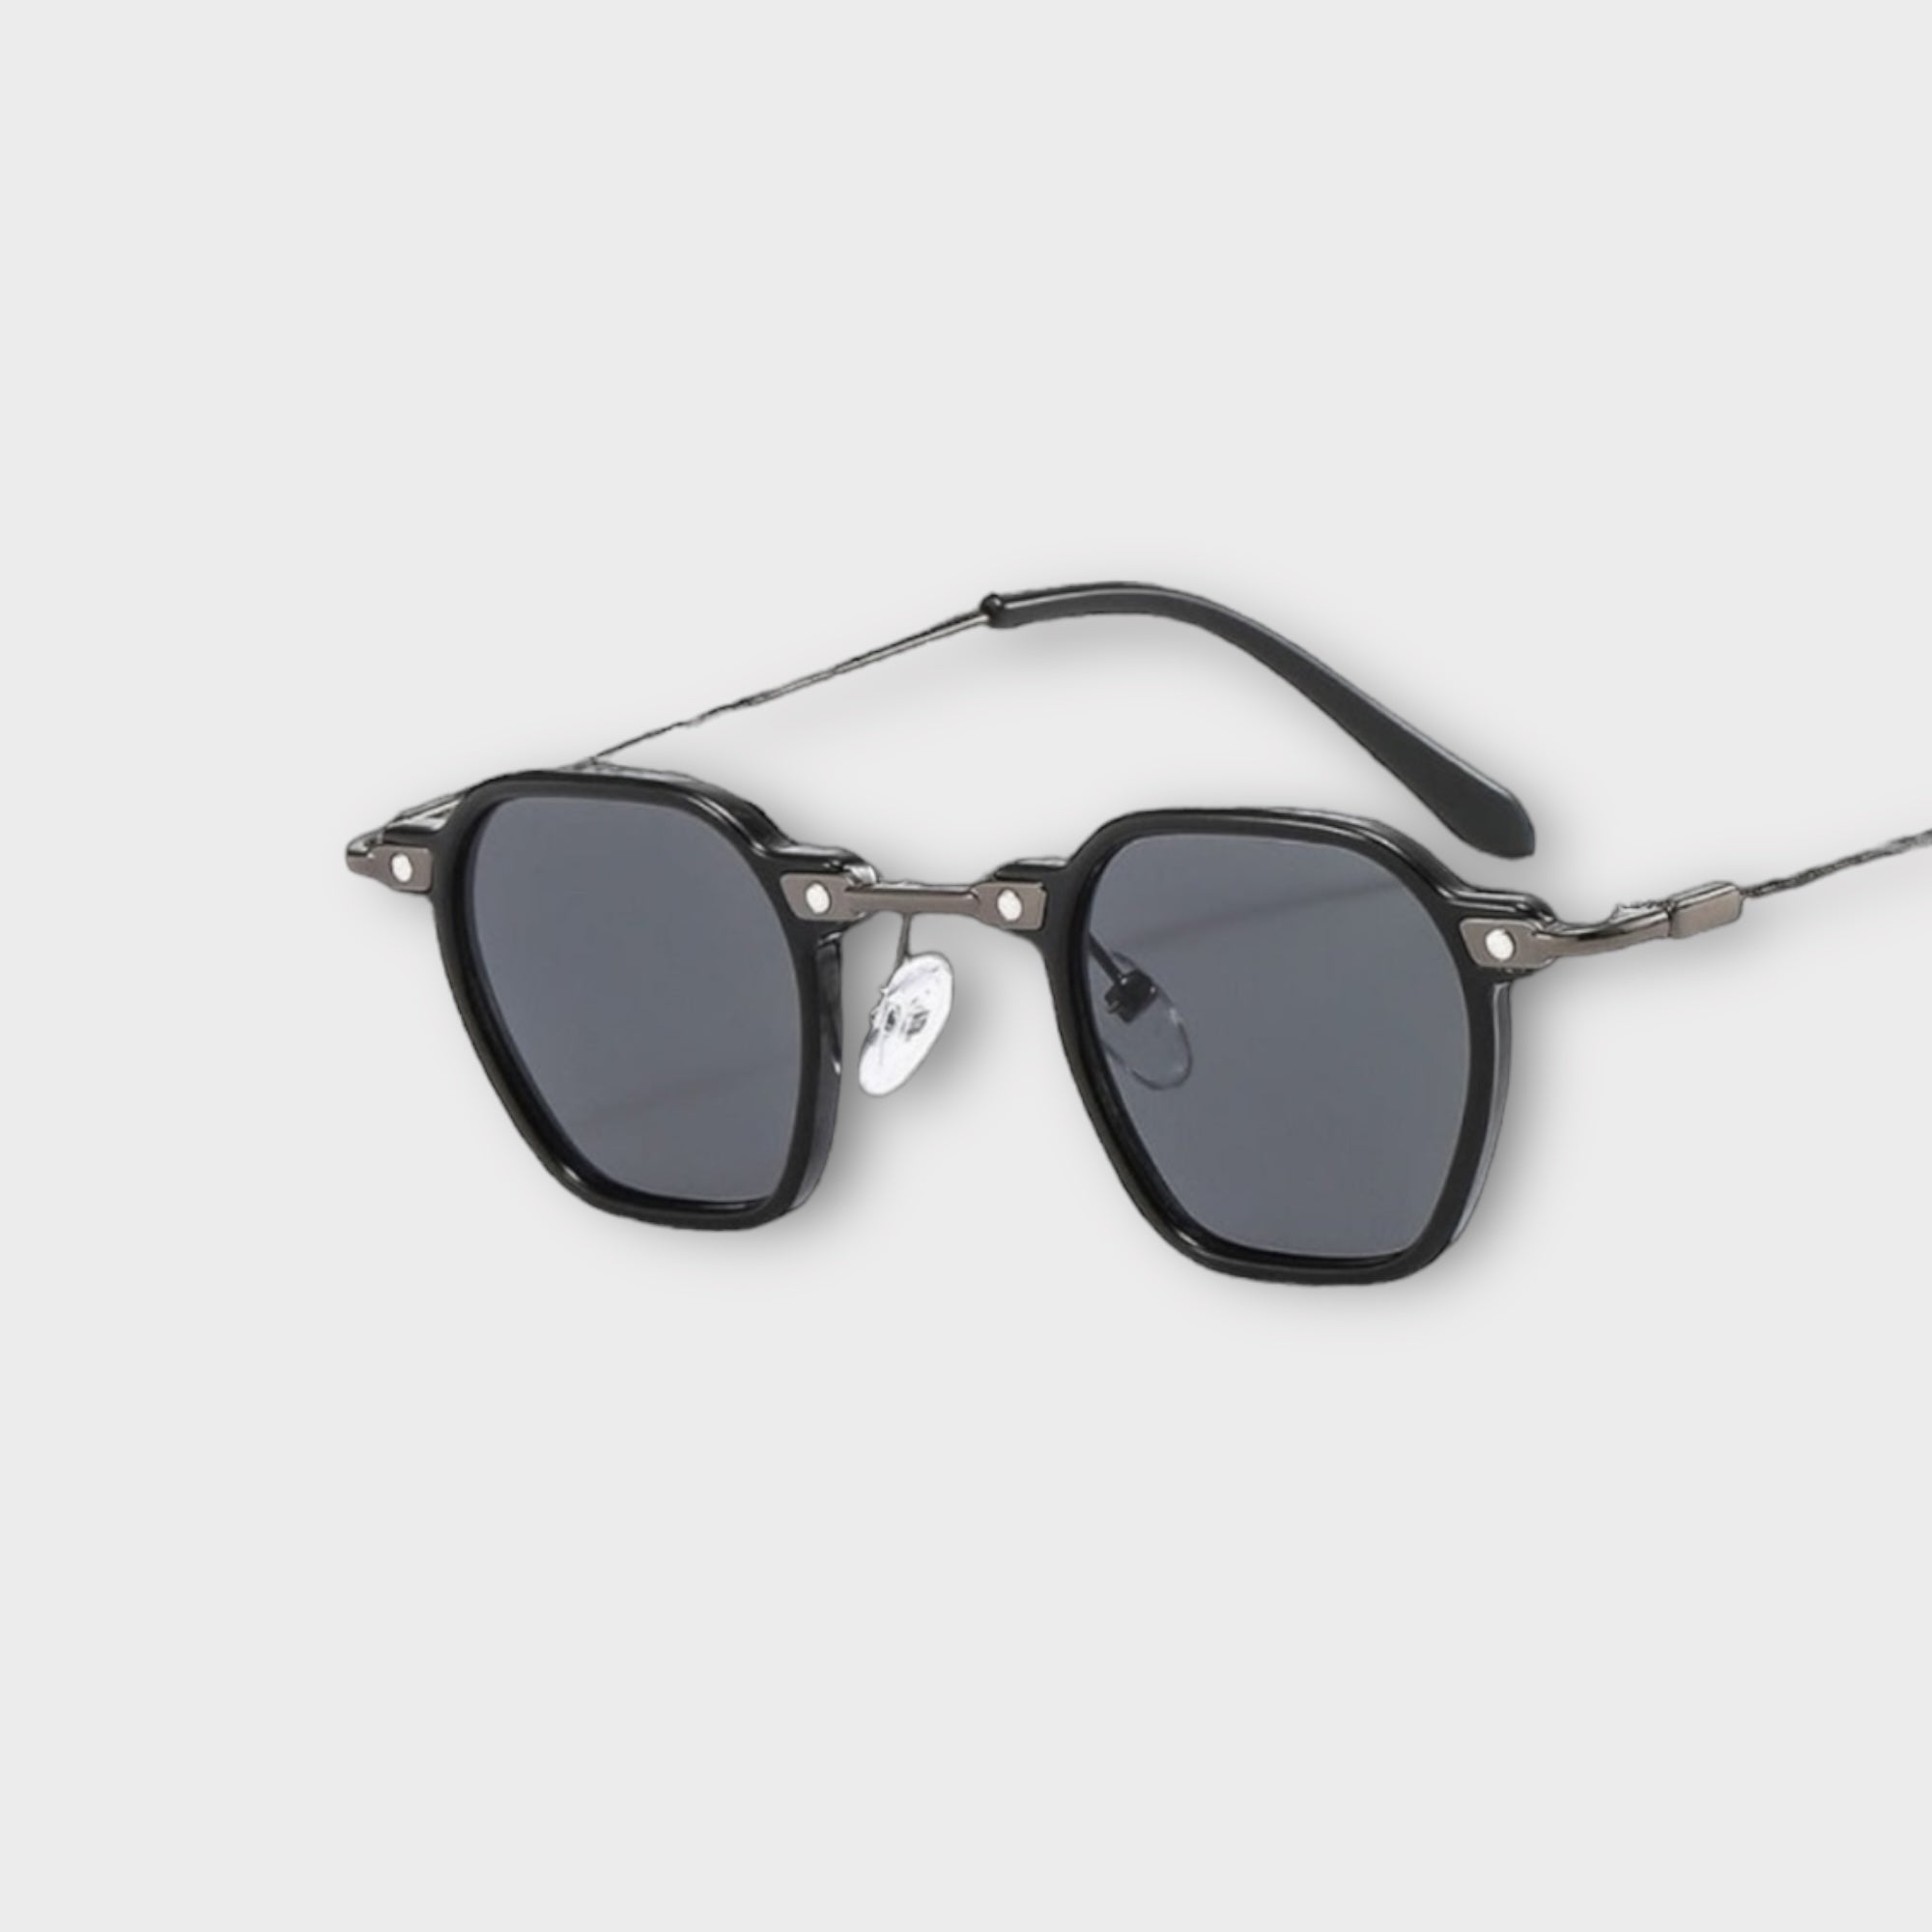 'DDEP' New round sunglasses for men and women